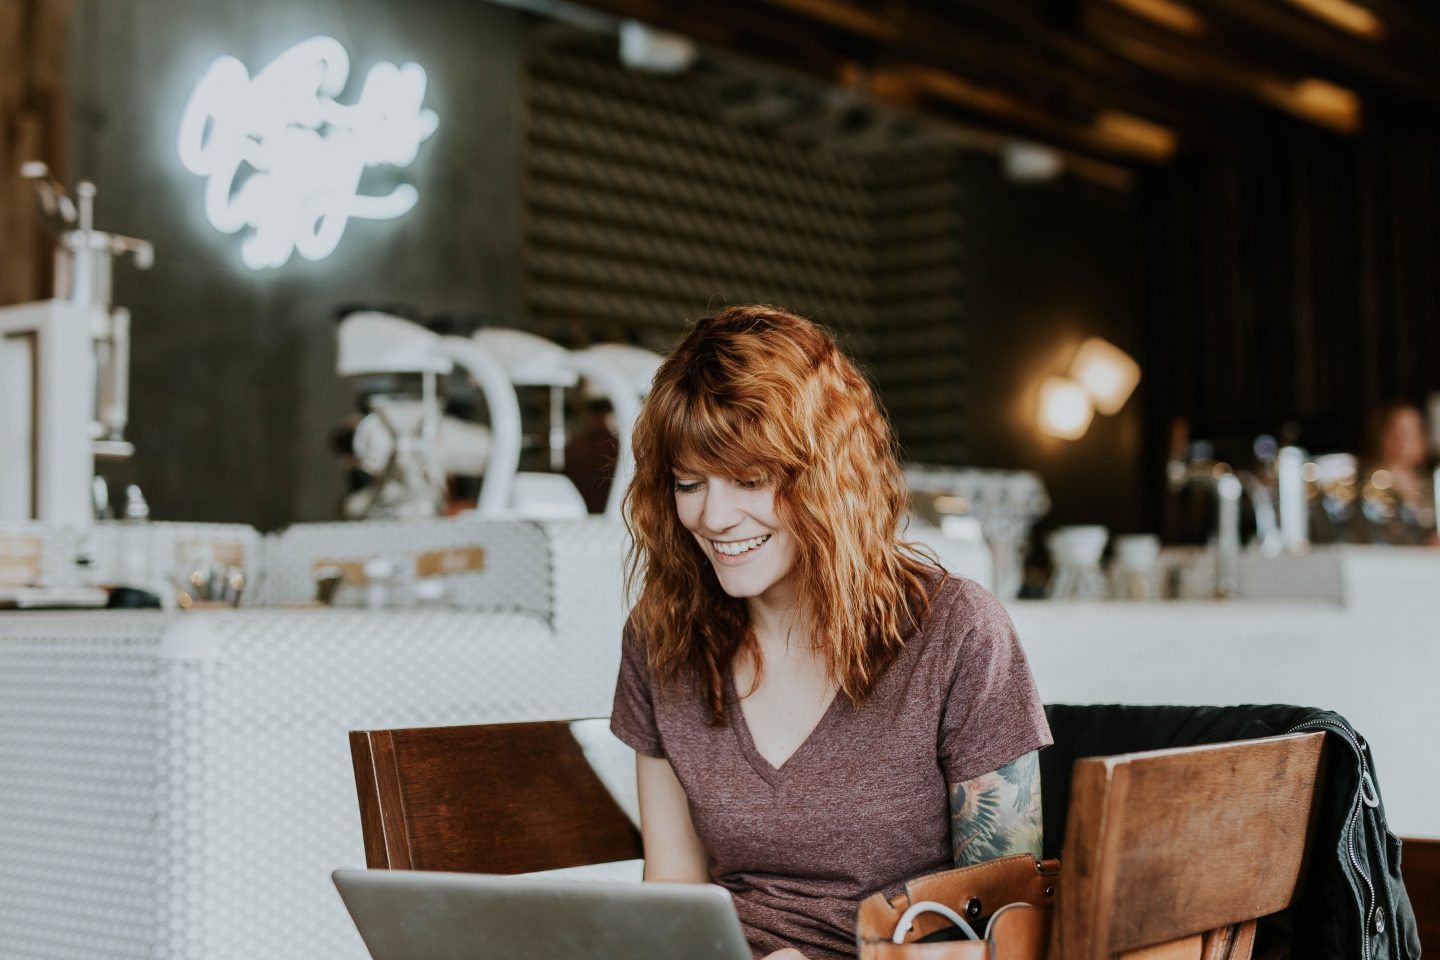 A photo of a woman, perhaps in a coffee shop, smiling and looking down at her laptop.